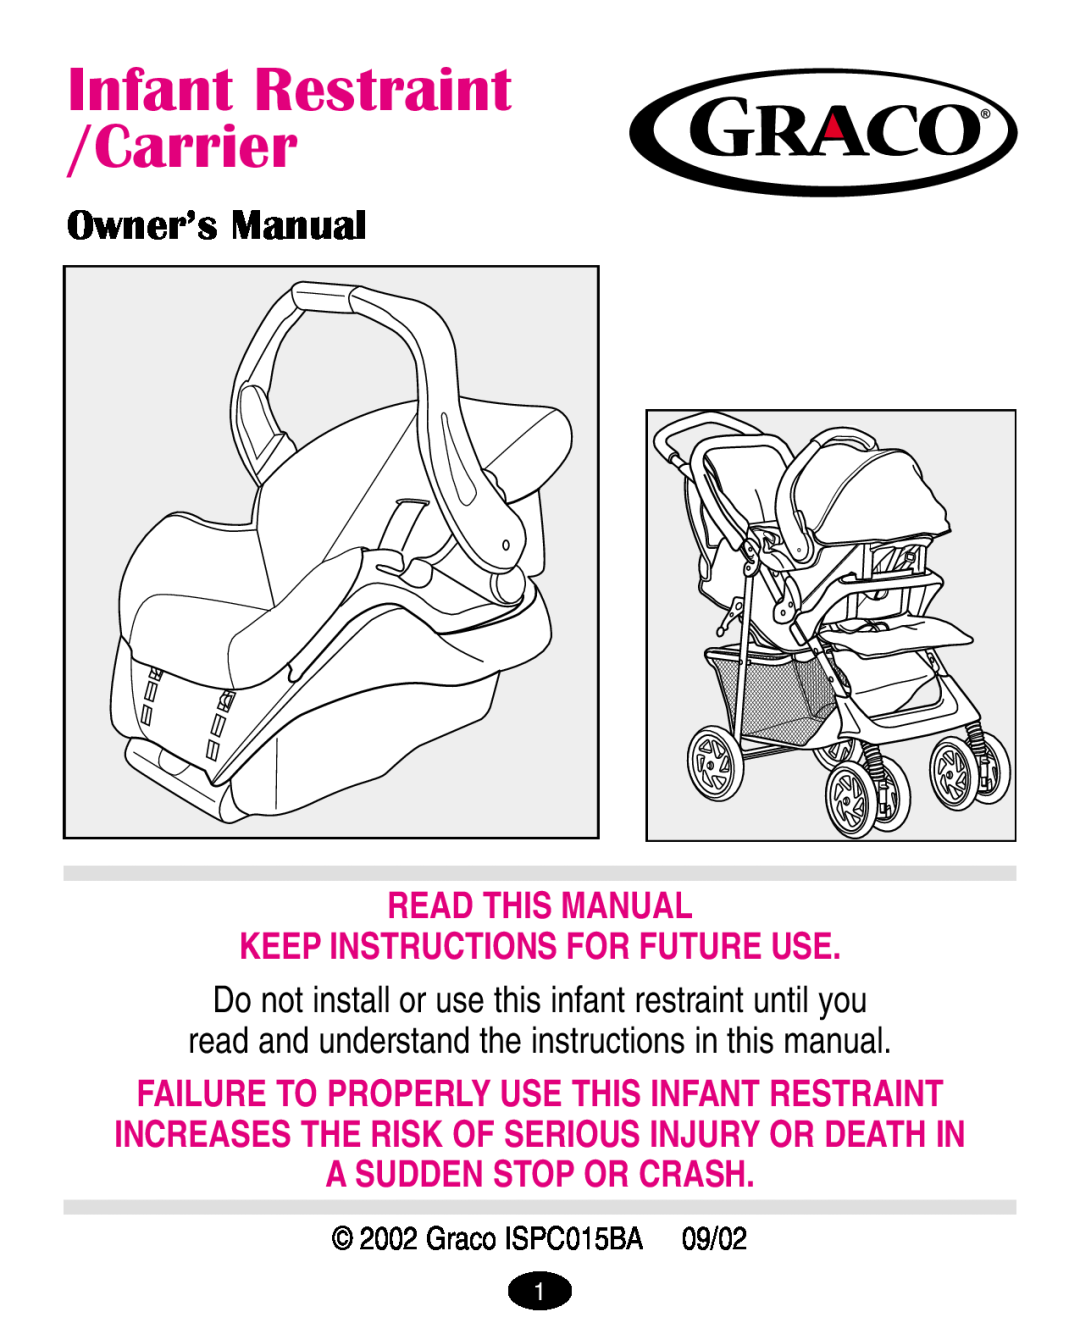 Graco ISPA005AA manual Owner’s Manual, Read This Manual Keep Instructions For Future Use, Infant Restraint /Carrier 